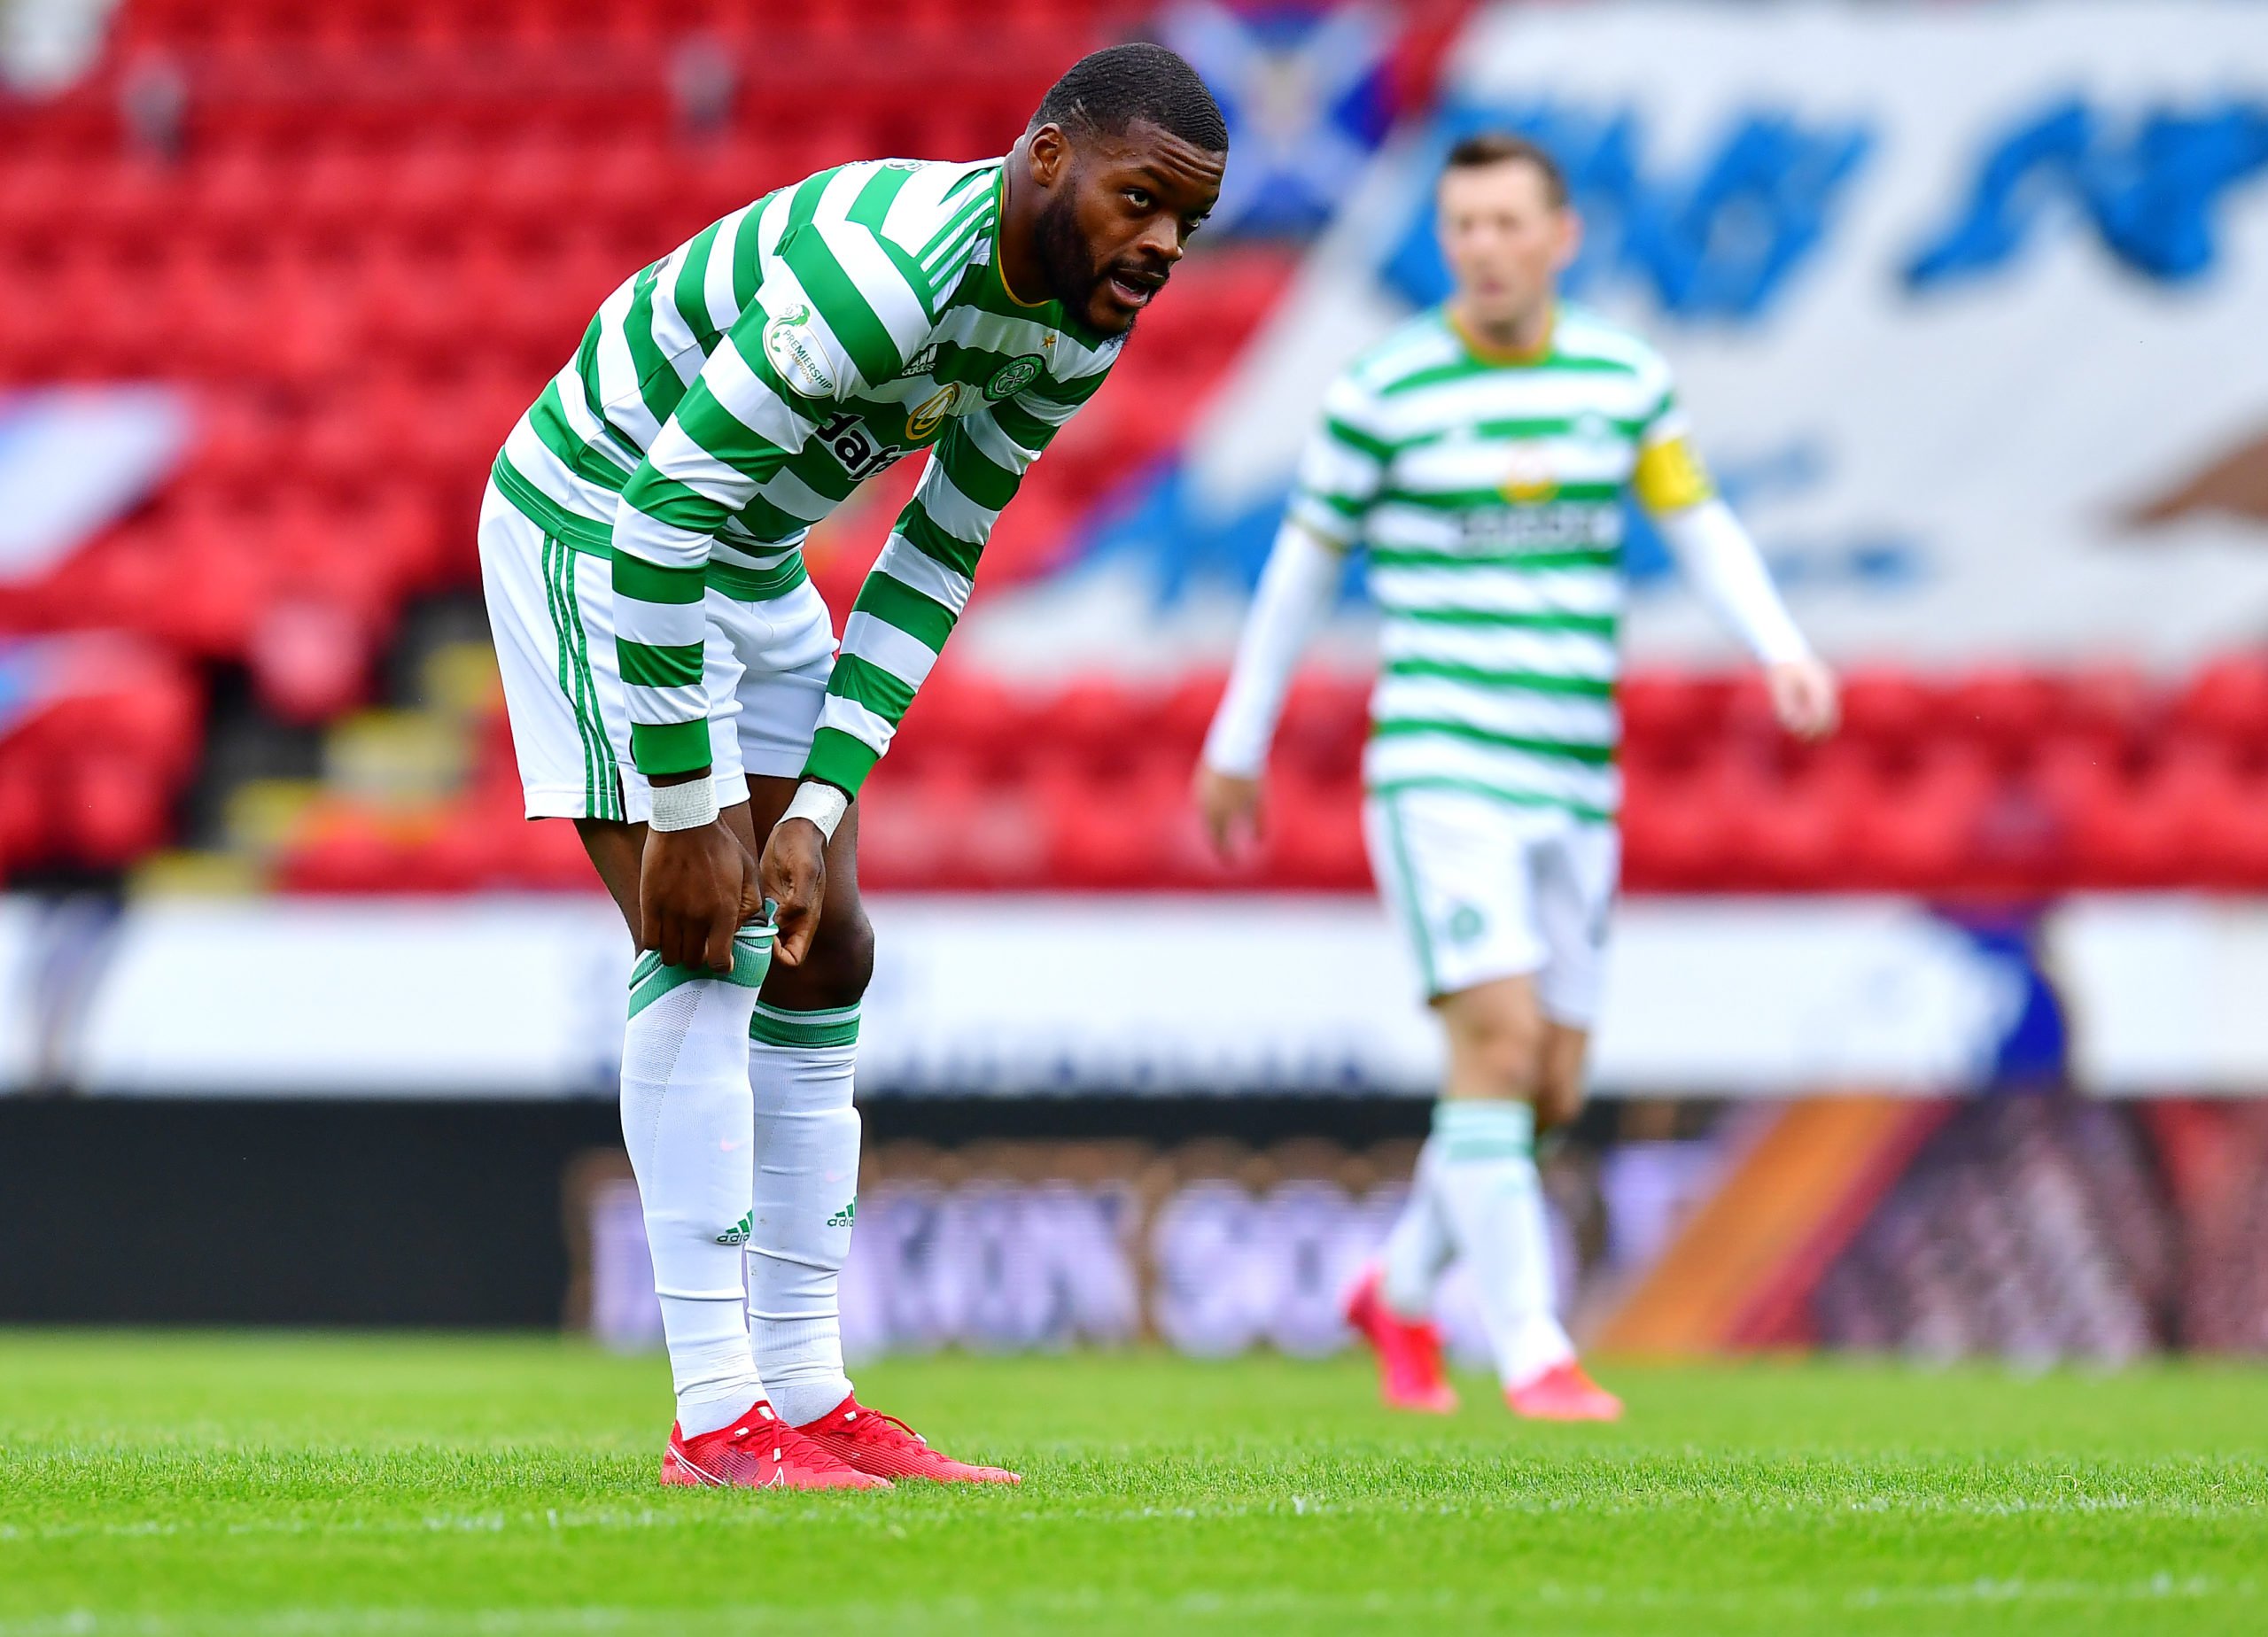 Ntcham's performances have been inconsistent as of late